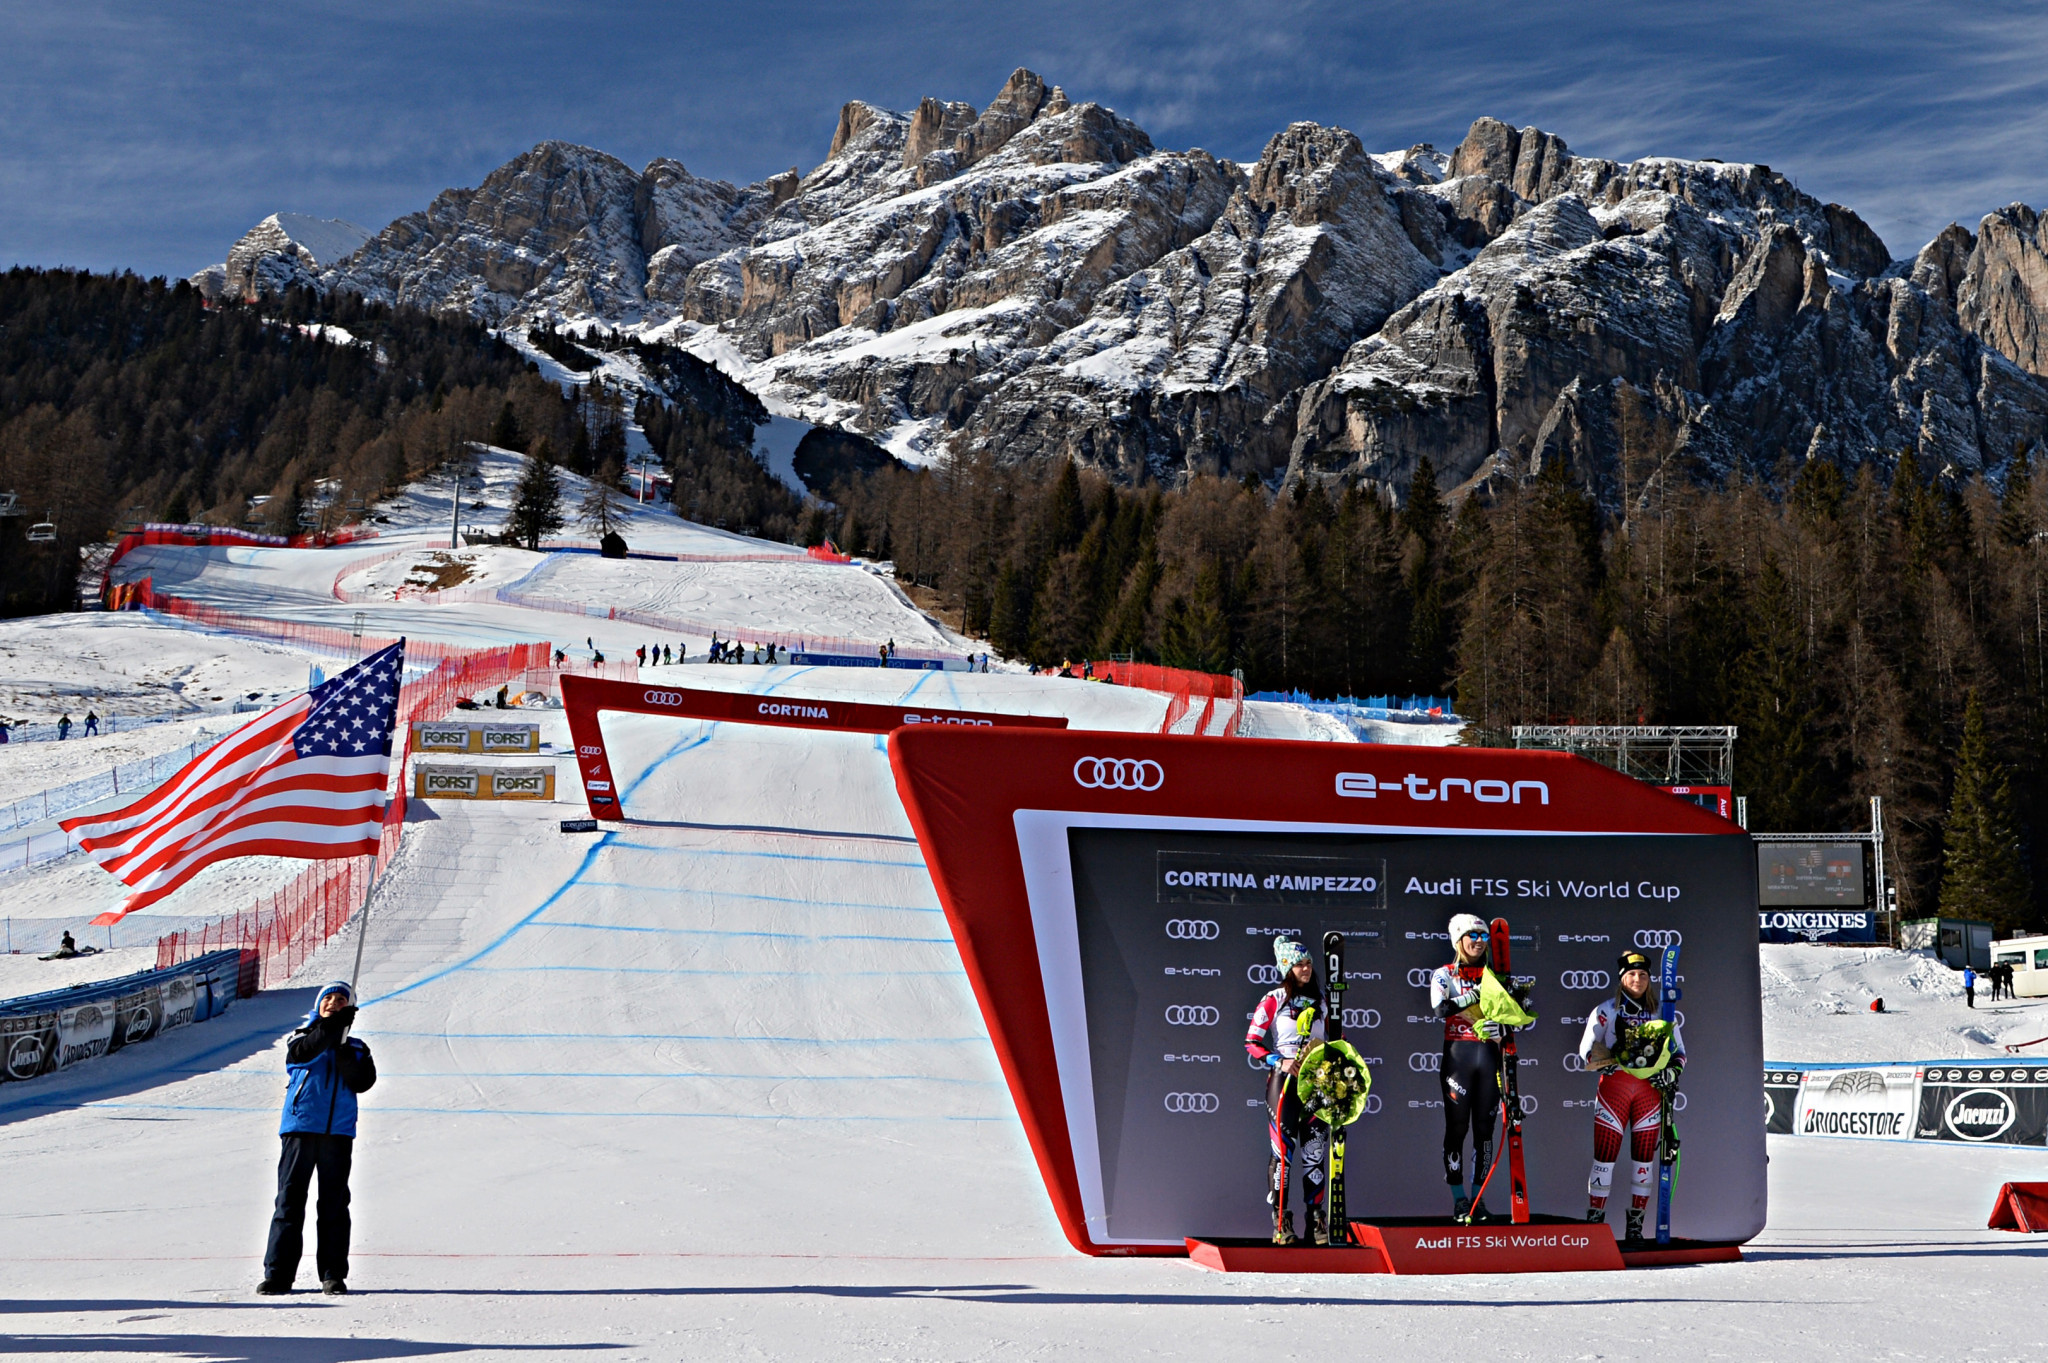 Cortina d'Ampezzo is due to host the FIS Alpine World Cup Finals later this month ©Getty Images